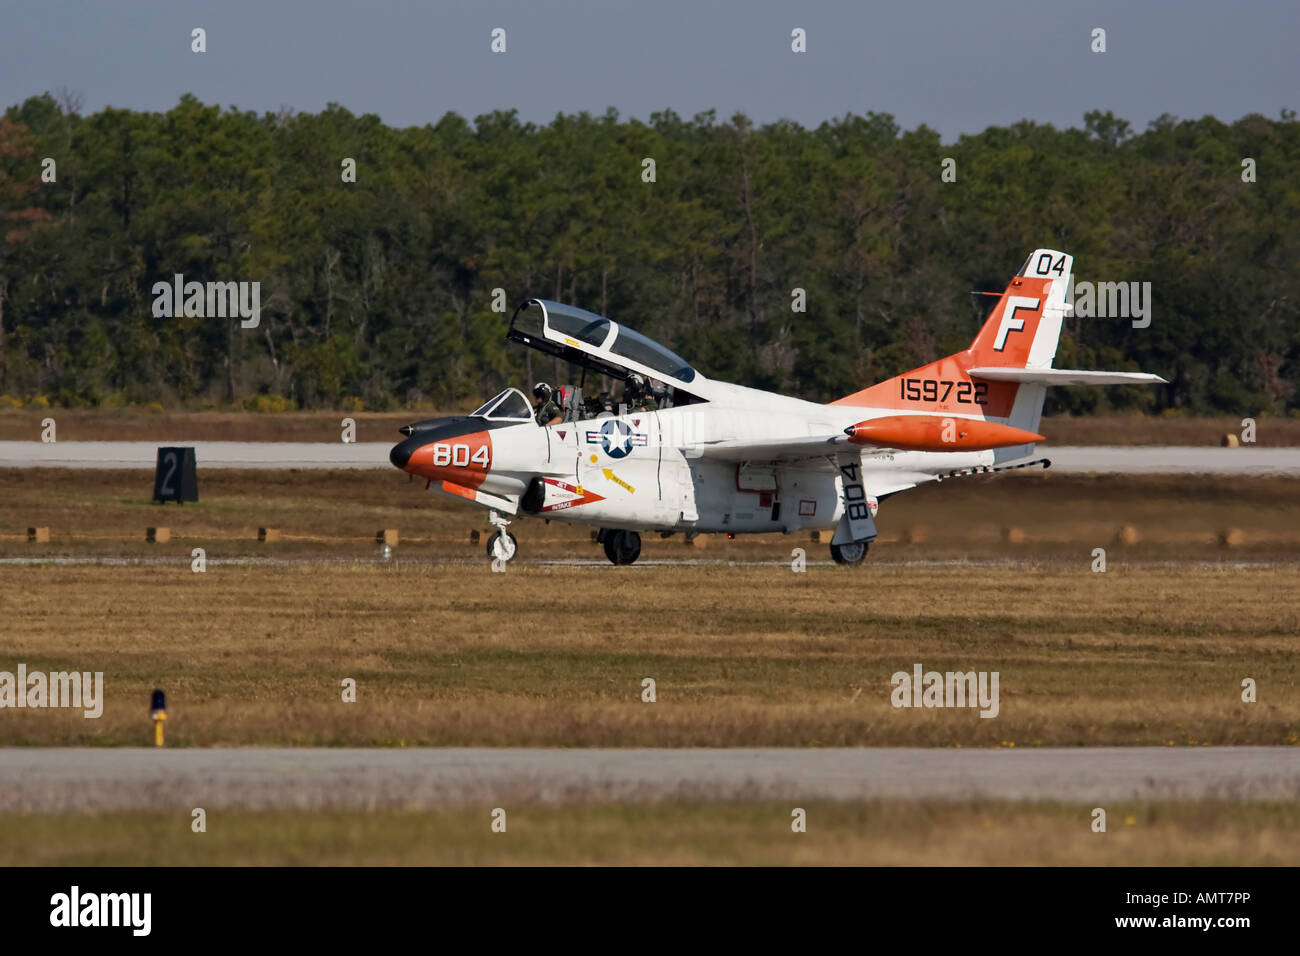 T-2 Buckeye taxiing down runway after landing at airshow Stock Photo